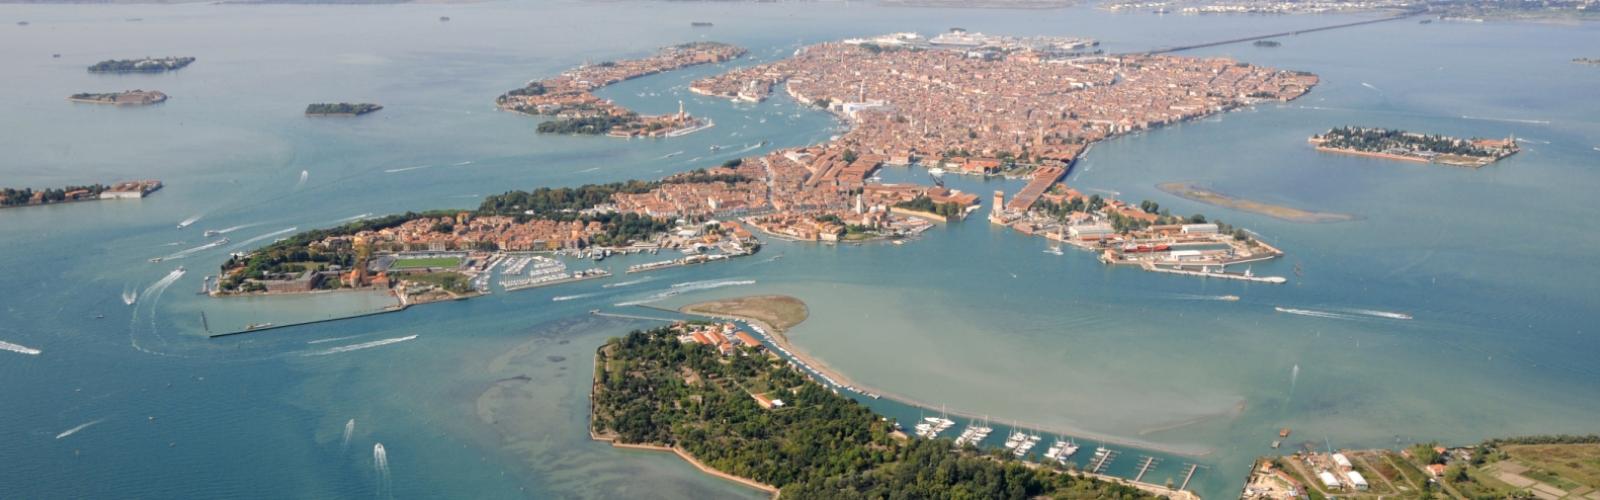 VENICE AND ISLANDS OF TH LAGOON